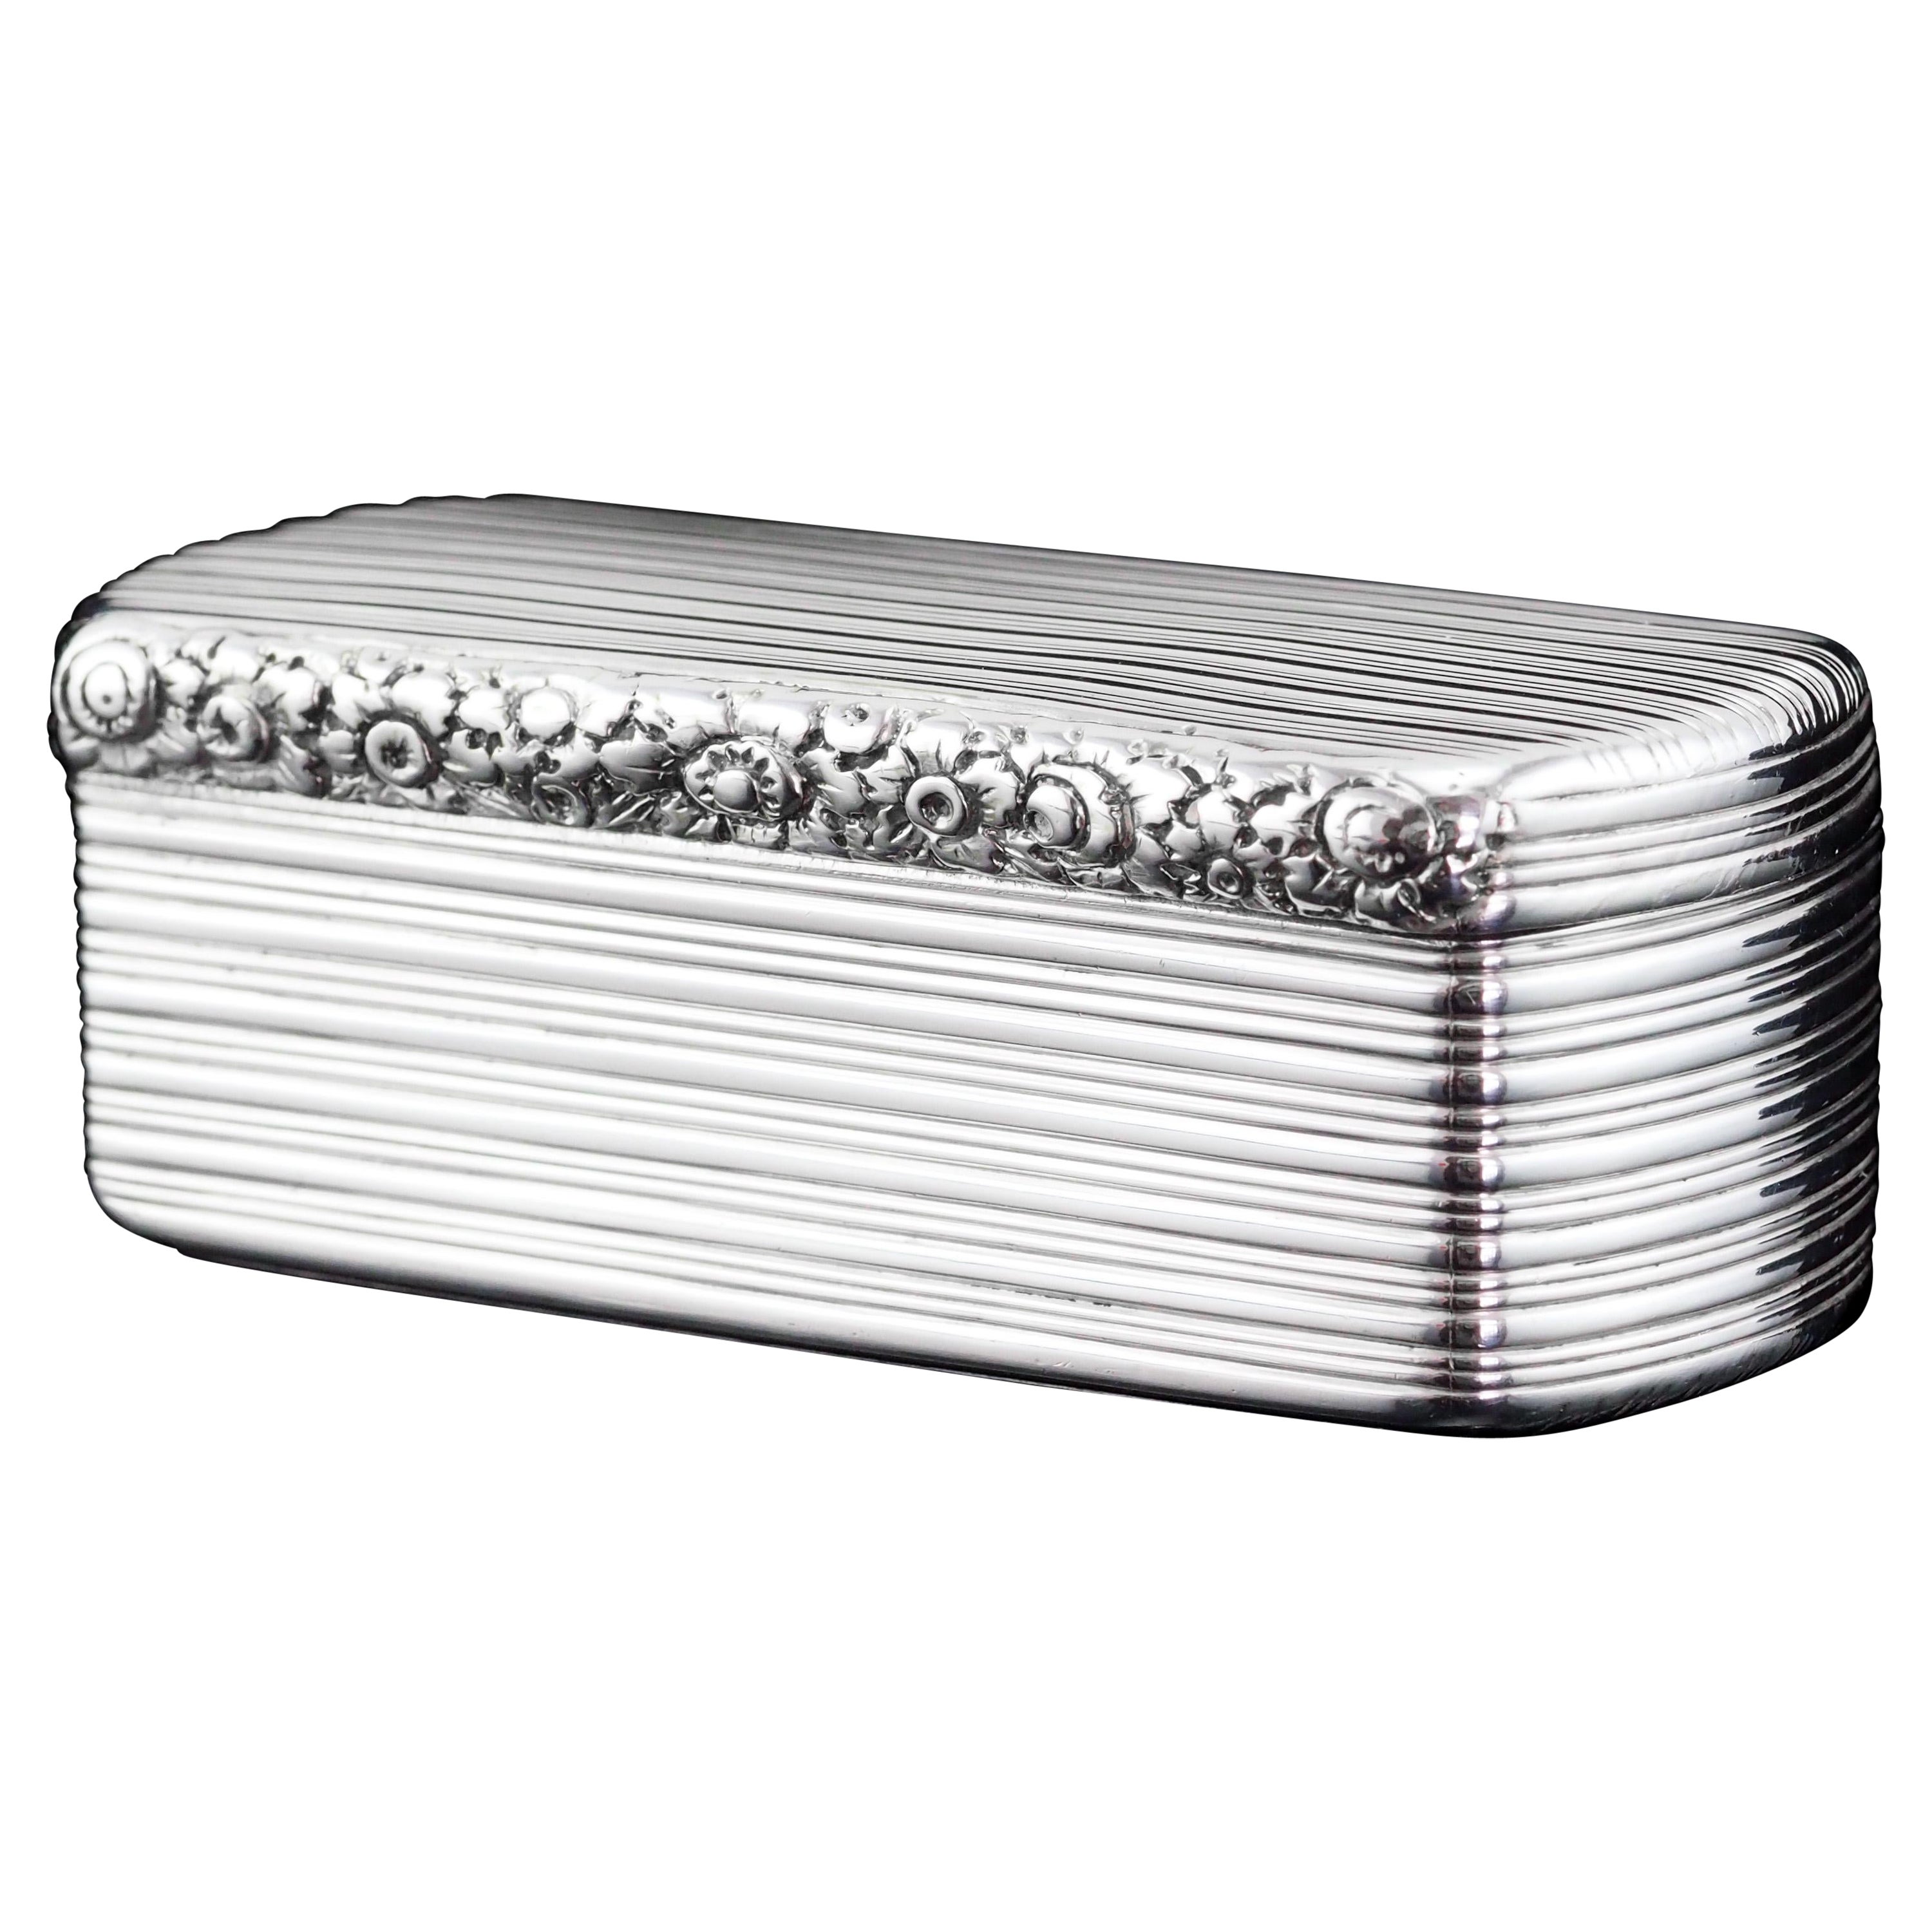 Antique Georgian Solid Silver Snuff Box Oblong Shape with Reeded Lines - Charles For Sale